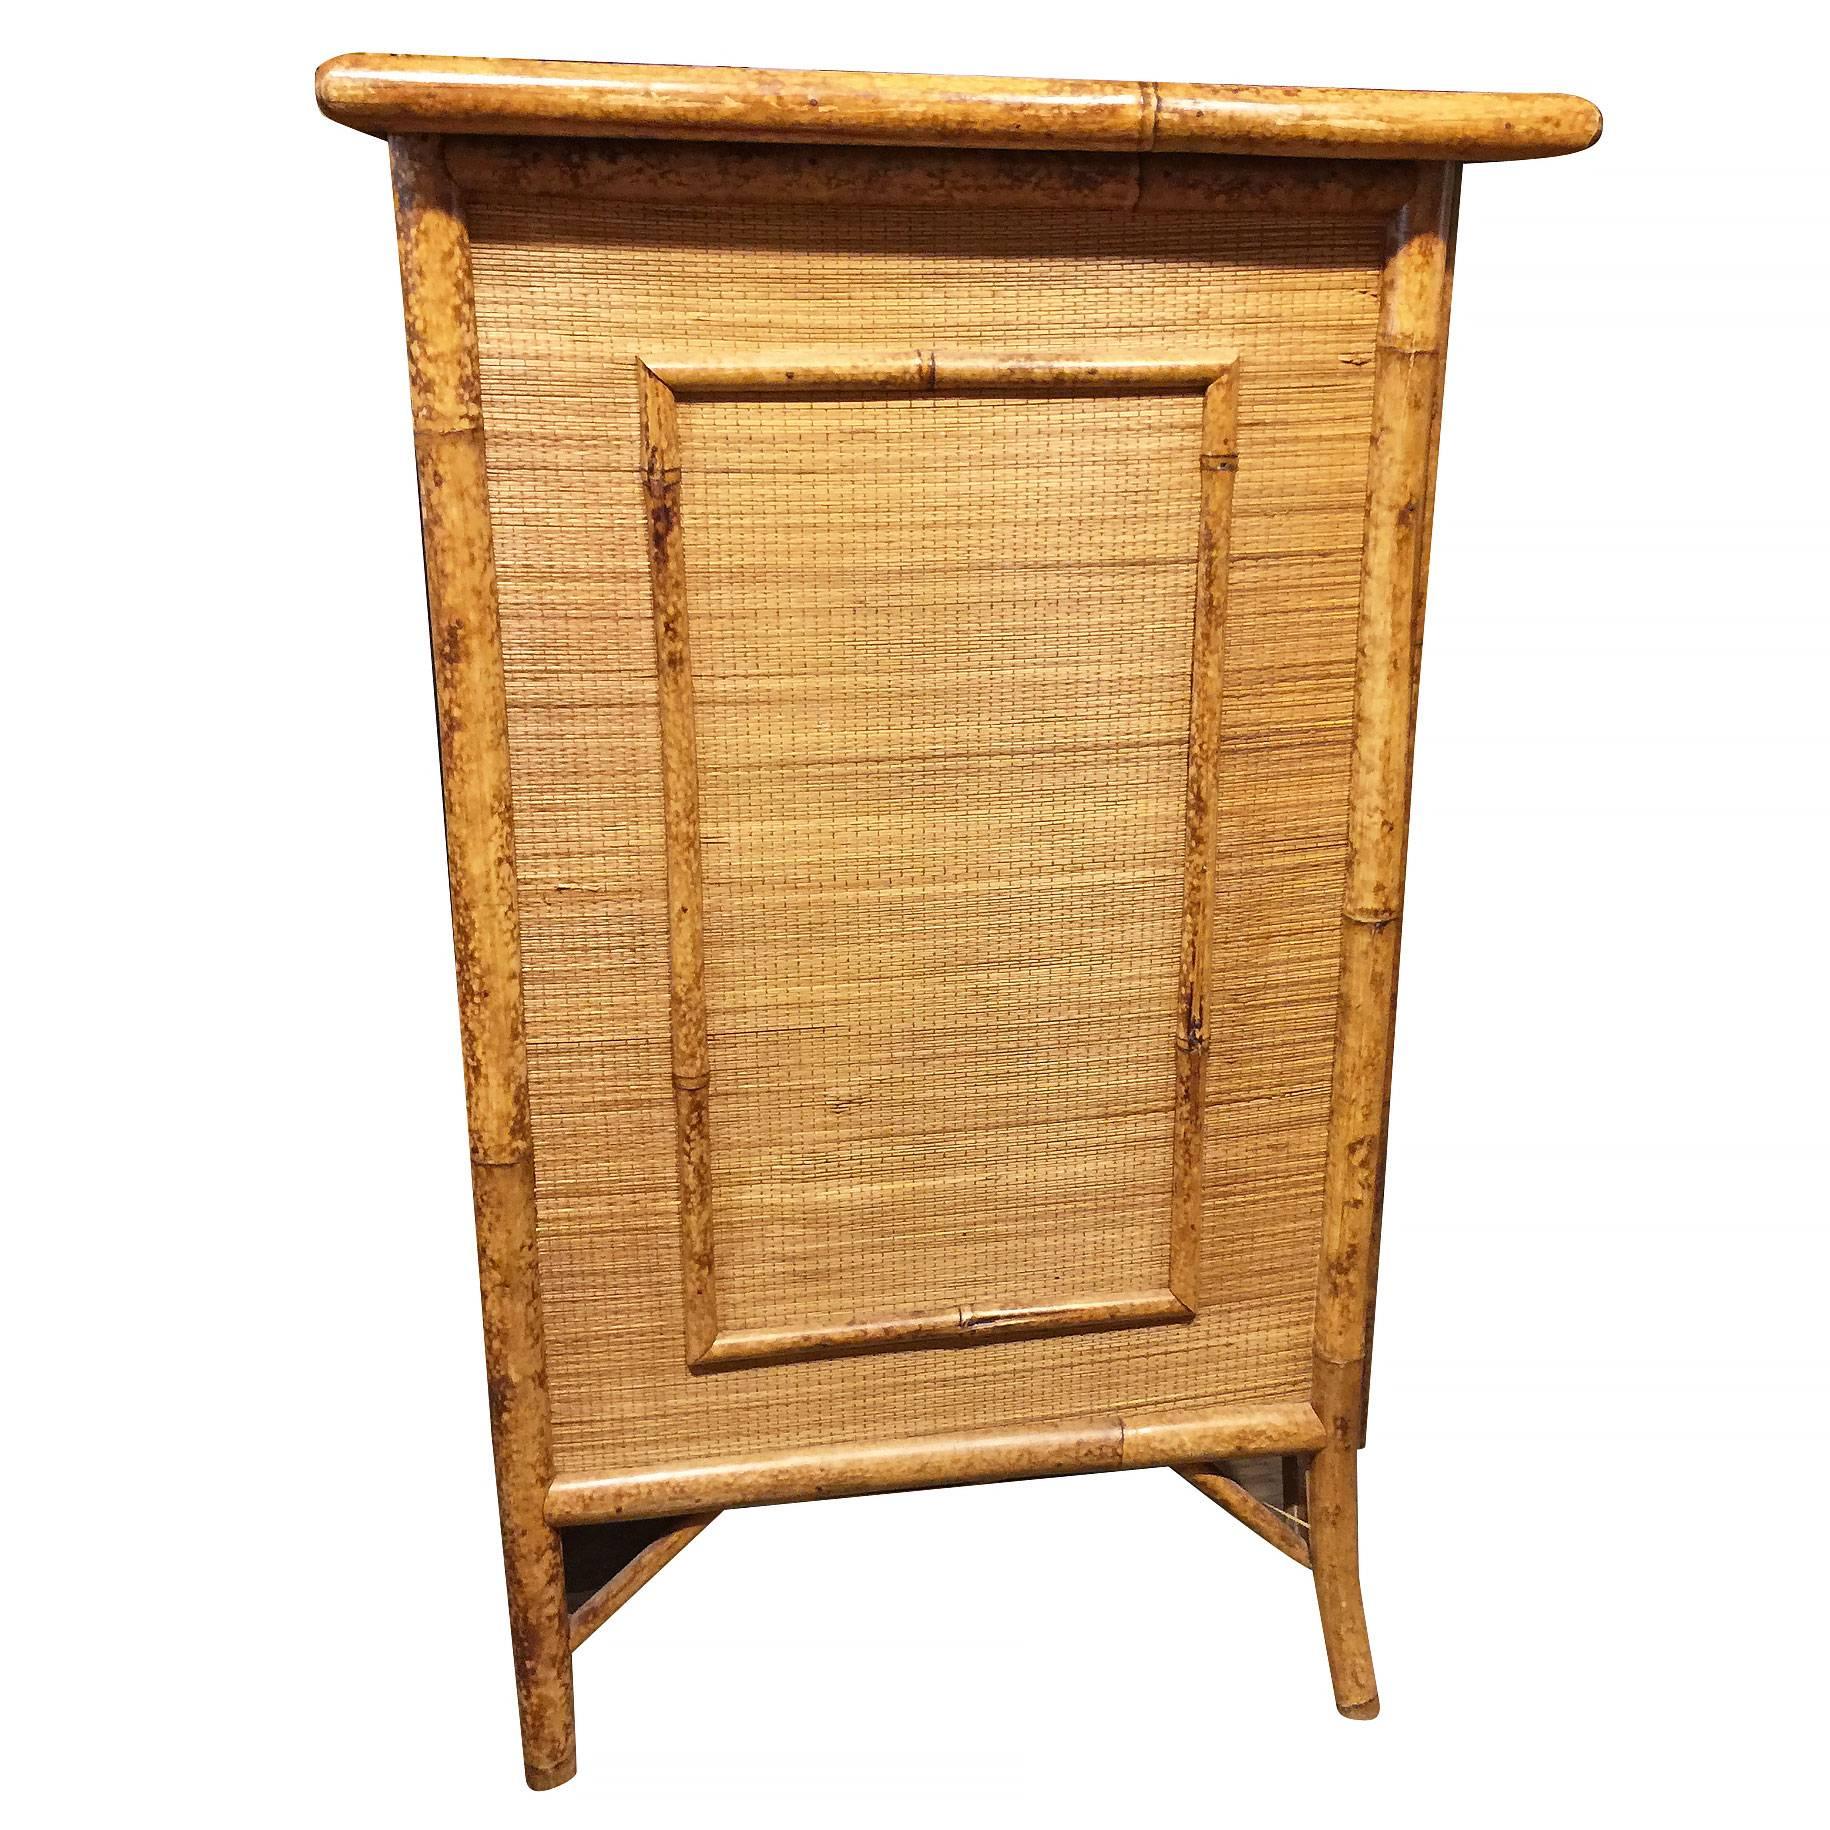 Aesthetic Movement Tiger bamboo lowboy chest of drawers with handwoven rice mat coverings, three large center drawers and two small top drawers. 

Restored to new for you.

All rattan, bamboo and wicker furniture has been painstakingly refurbished